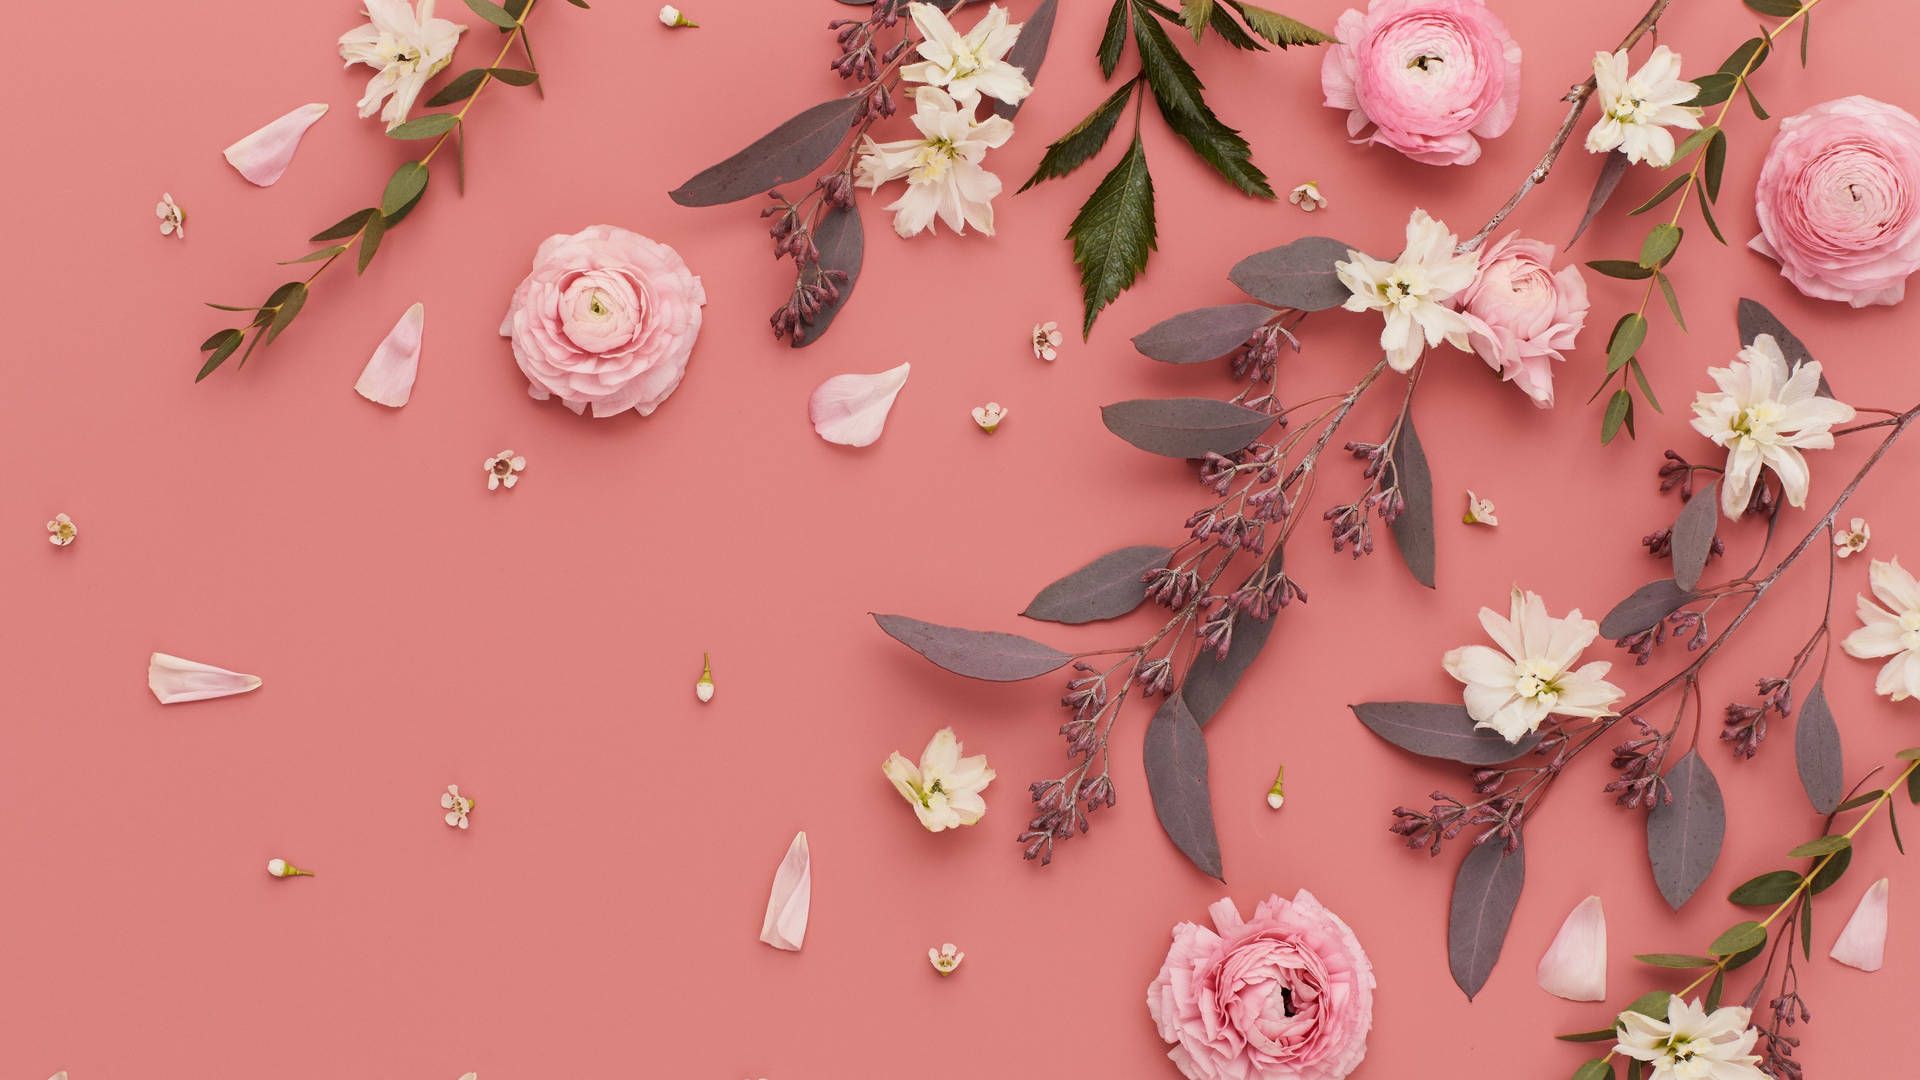 A pink background with white and pink flowers and leaves - Salmon